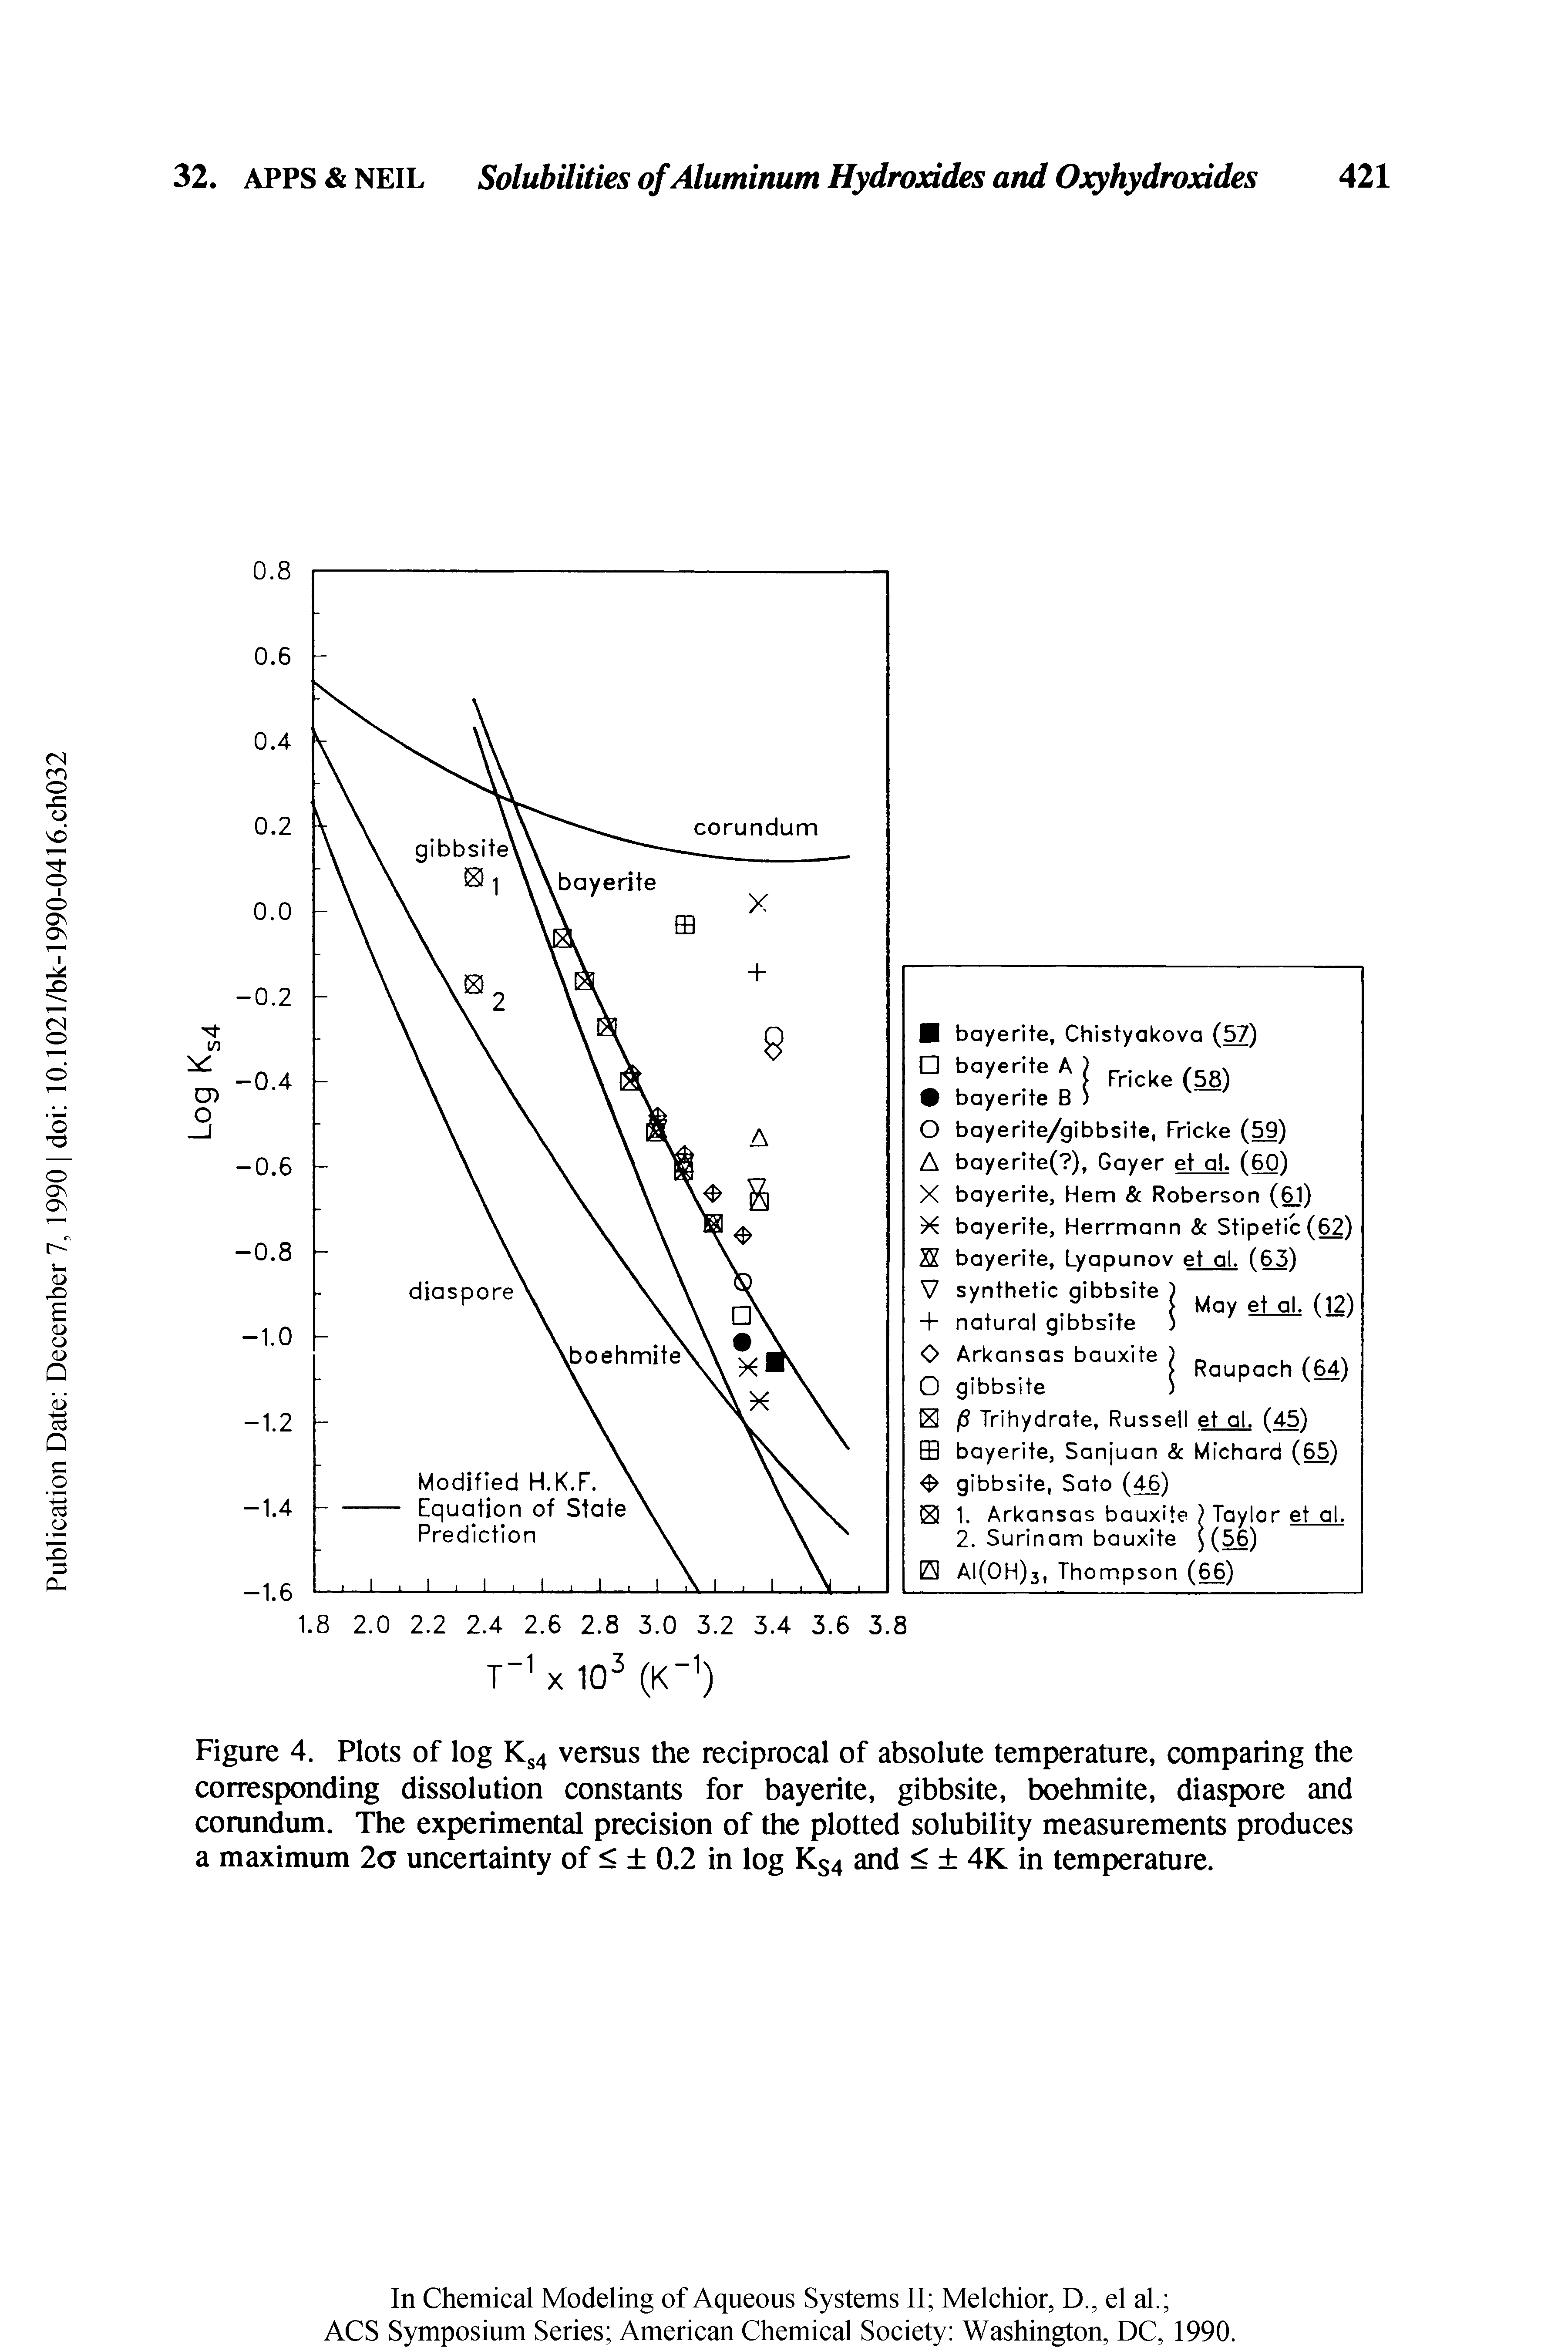 Figure 4. Plots of log Ks4 versus the reciprocal of absolute temperature, comparing the corresponding dissolution constants for bayerite, gibbsite, boehmite, diaspore and corundum. The experimental precision of the plotted solubility measurements produces a maximum 2o uncertainty of < 0.2 in log Ks4 and < 4K in temperature.